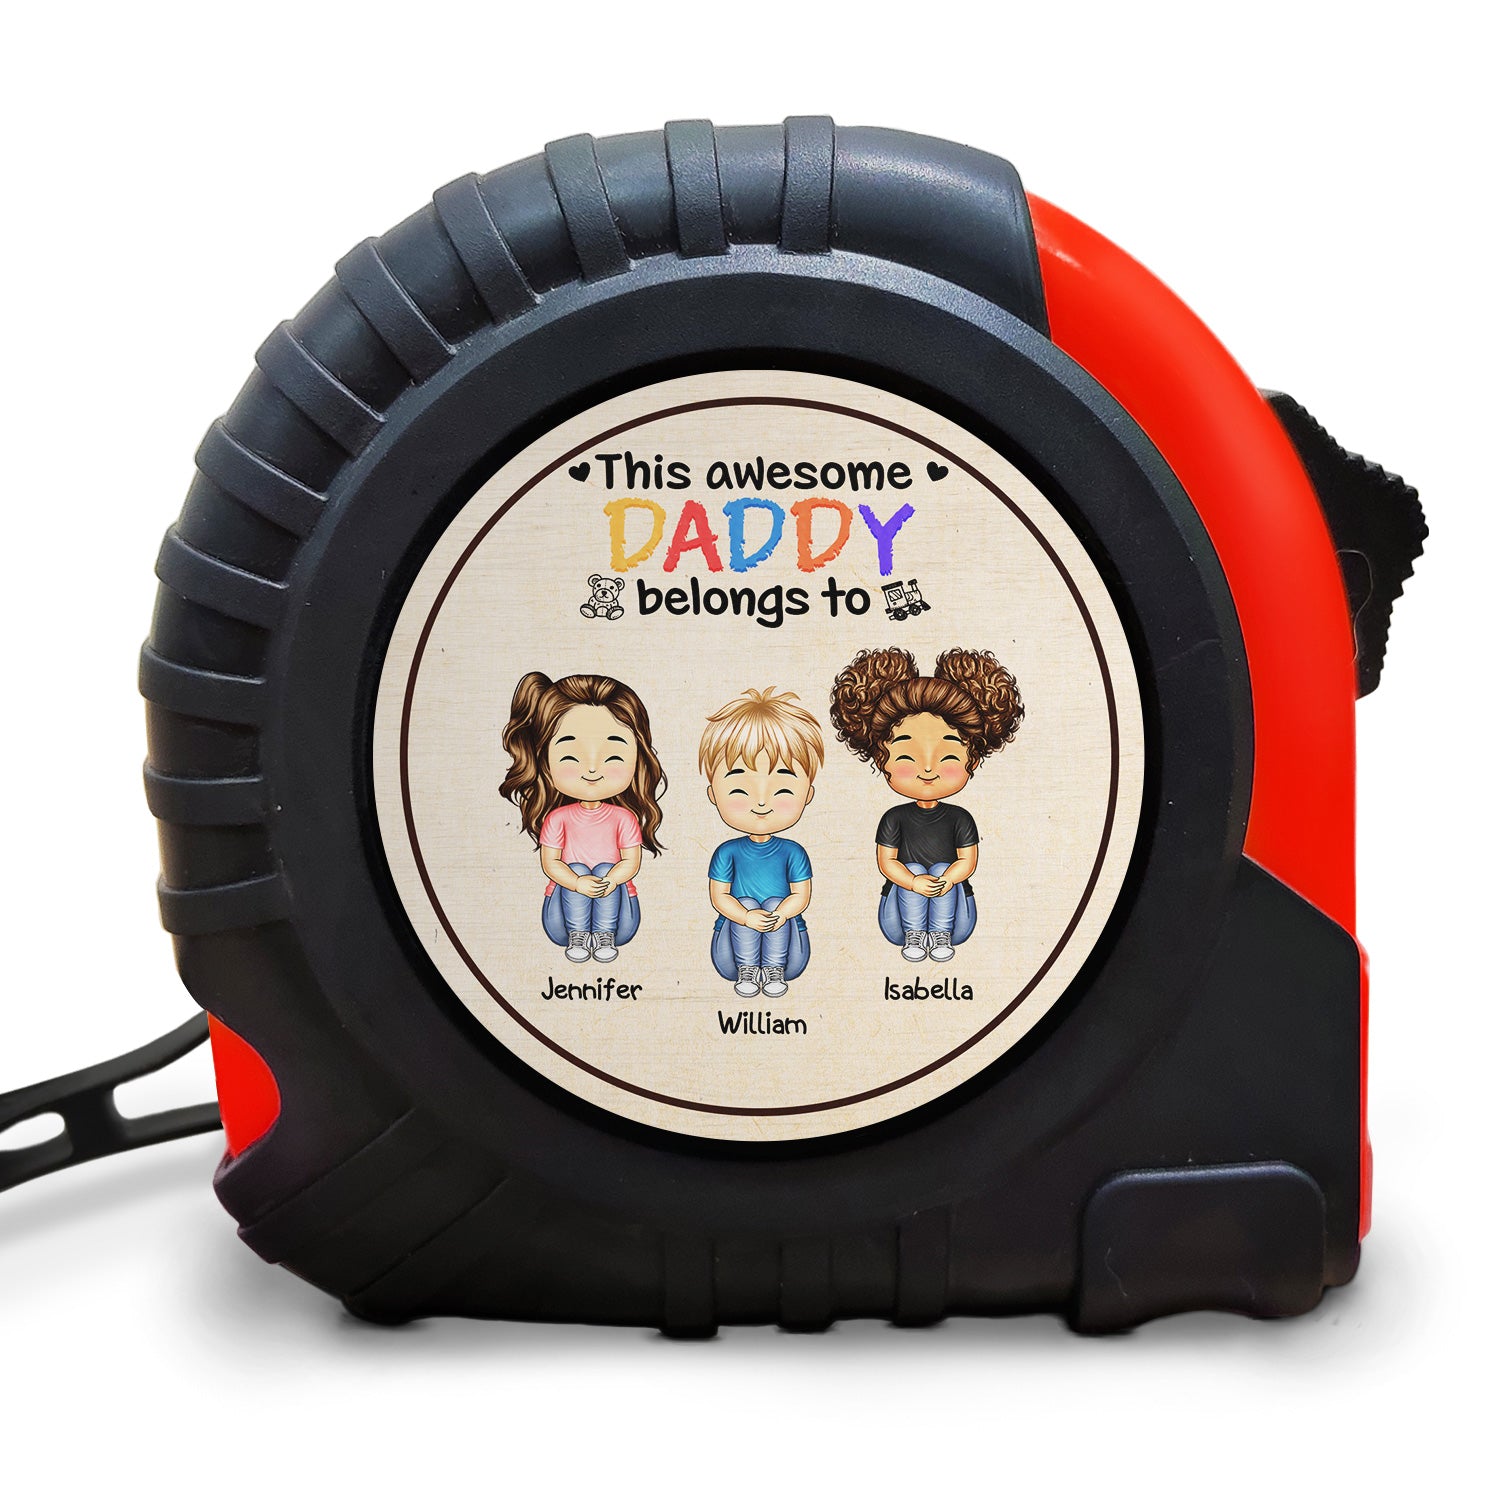 This Awesome Daddy Belongs To - Birthday, Loving Gift For Dad, Father, Grandfather, Grandpa - Personalized Tape Measure